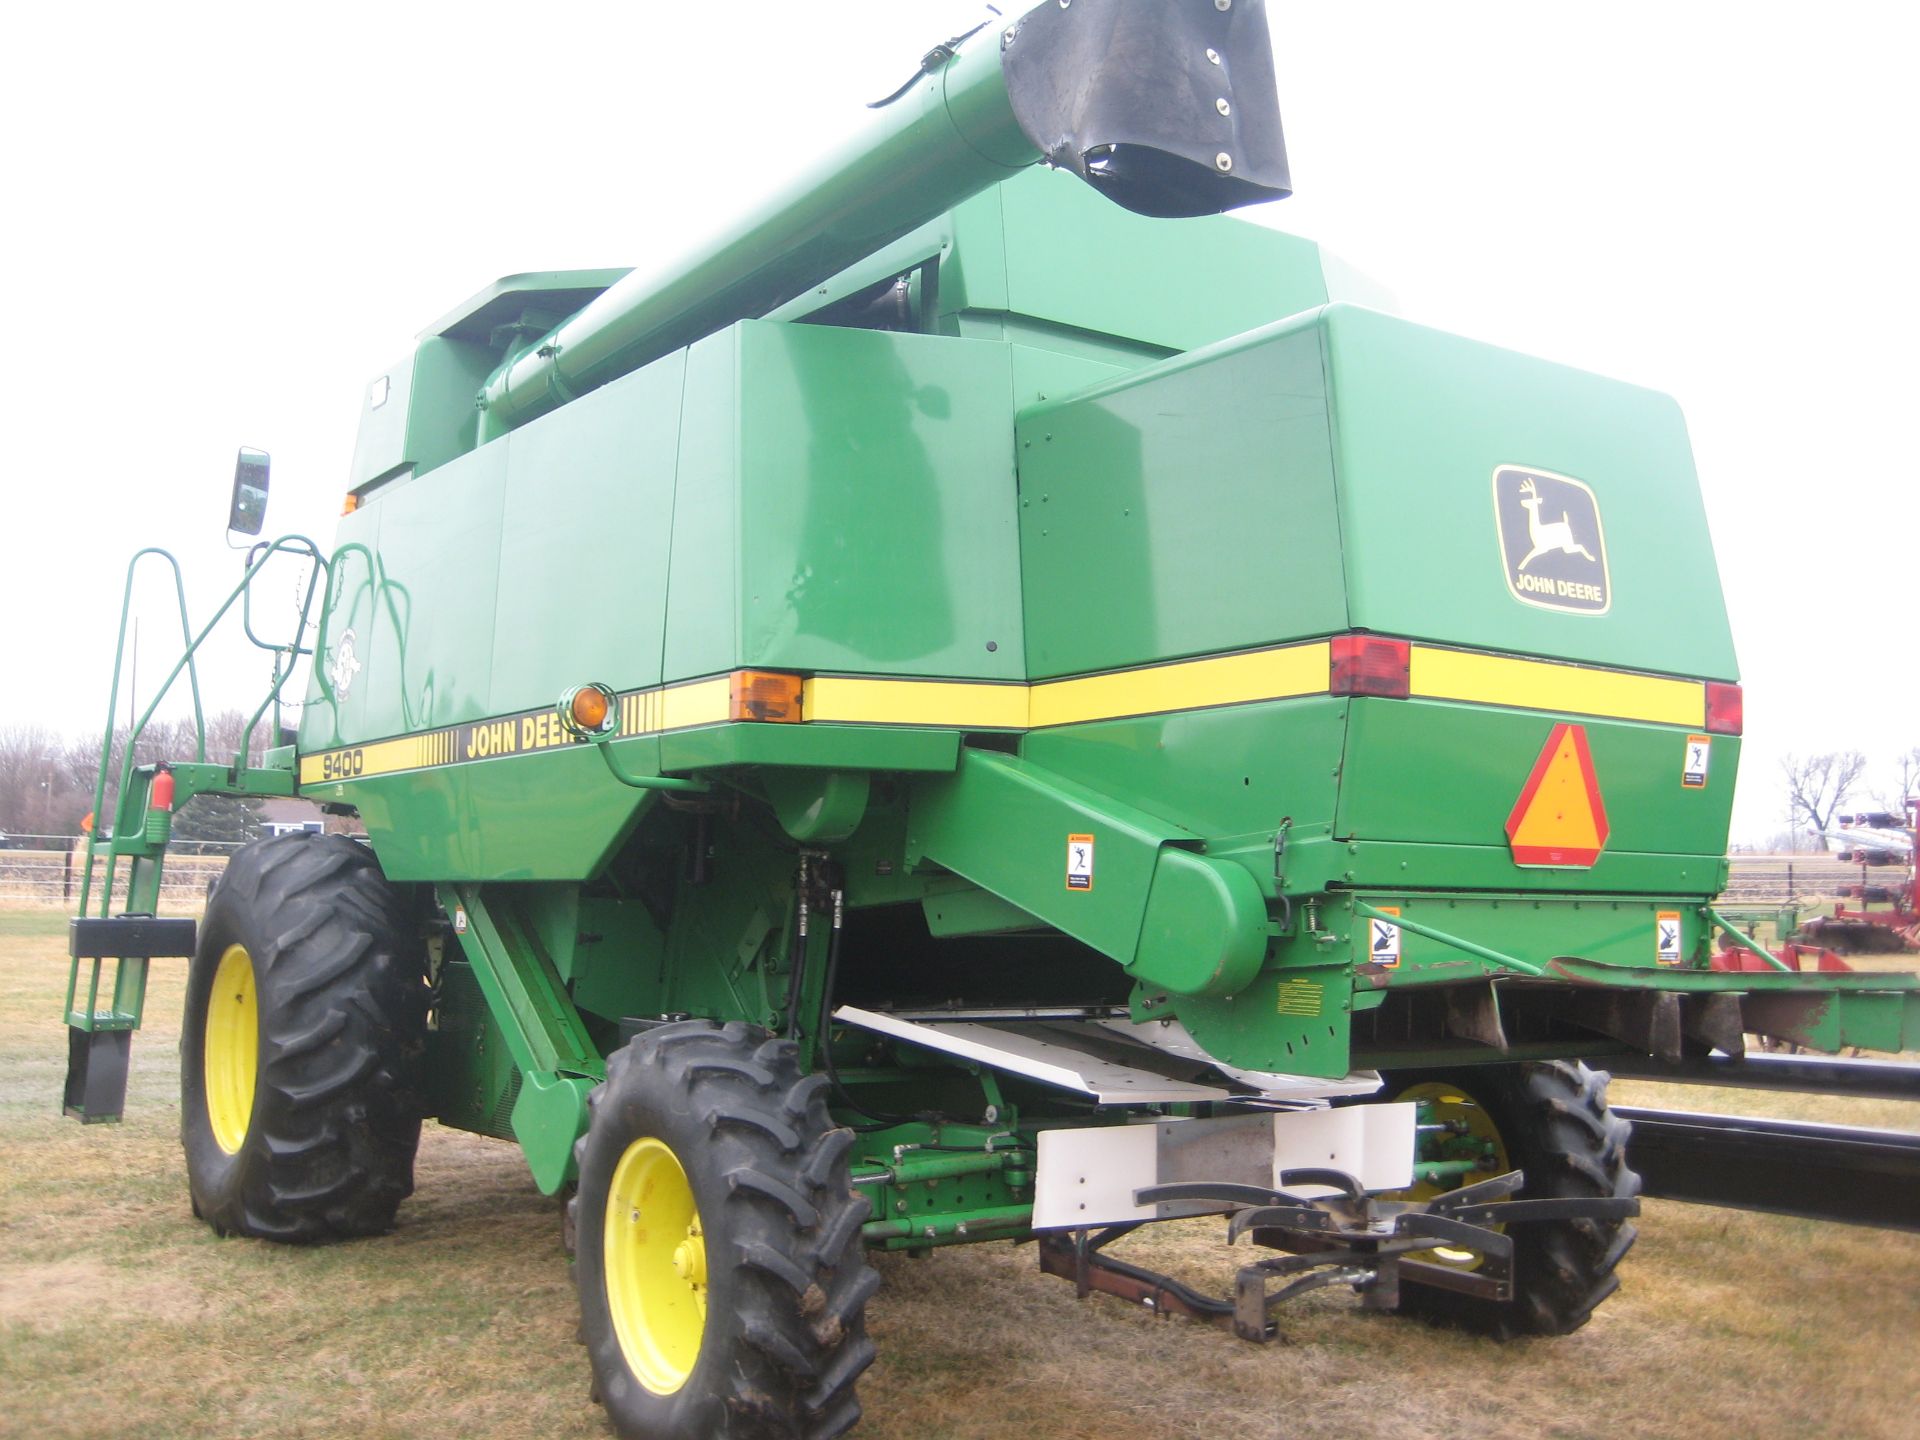 '97 JD 9400, 24.5x32, MAURER EXT., SHAFF SPREADER, WIRED FOR GREEN STAR, 3826/2826 HRS, SN-670541 - Image 5 of 28